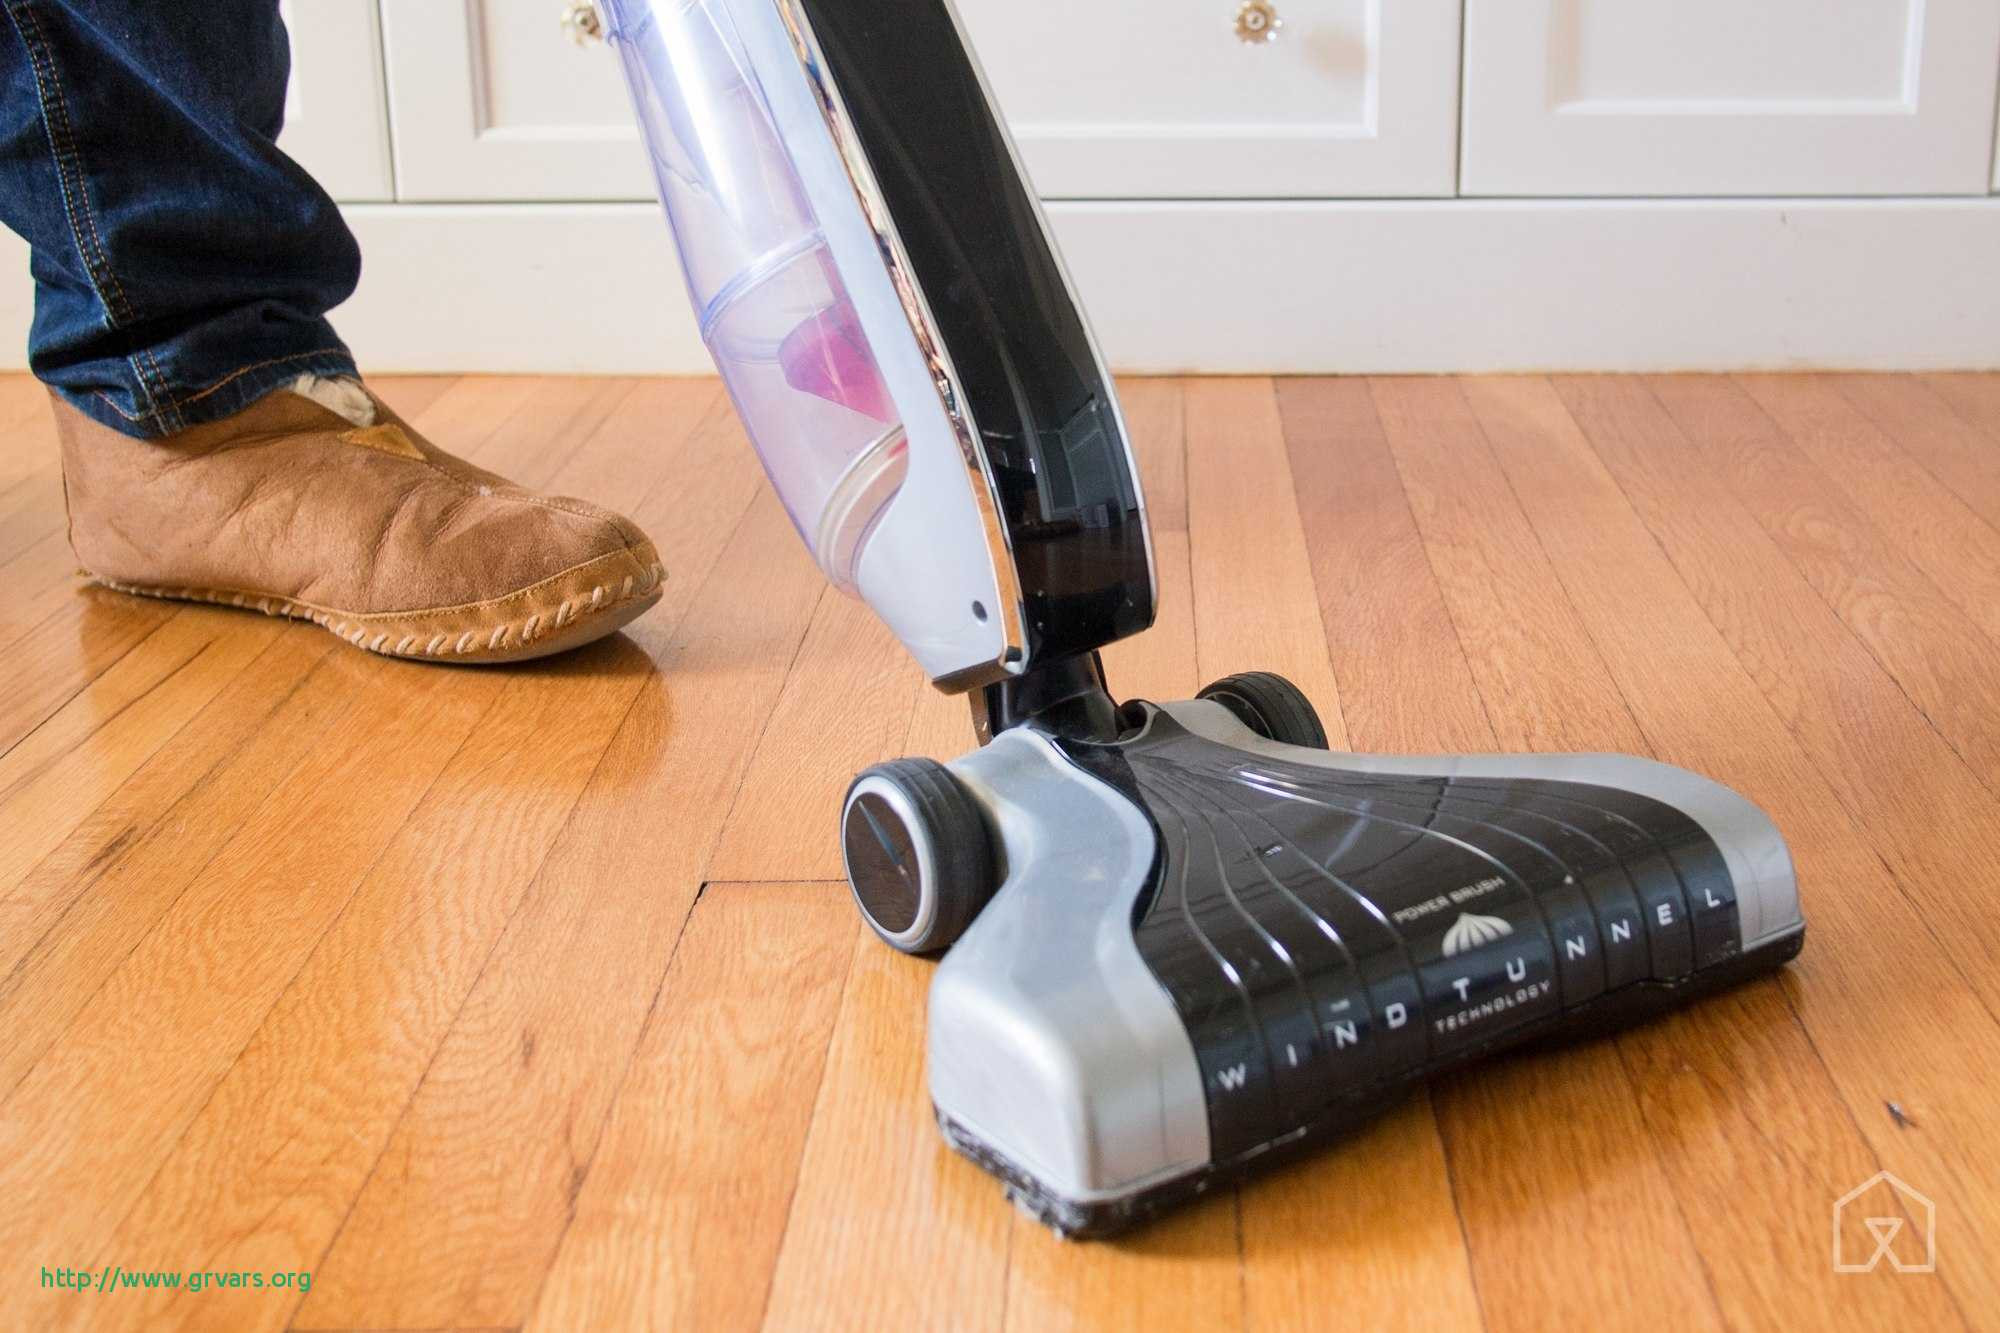 15 Lovable Best Vacuum for Pet Hair and Hardwood Floors and Carpet 2022 free download best vacuum for pet hair and hardwood floors and carpet of 16 luxe good vacuum for carpet and hardwood floor ideas blog intended for good vacuum for carpet and hardwood floor luxe best canis